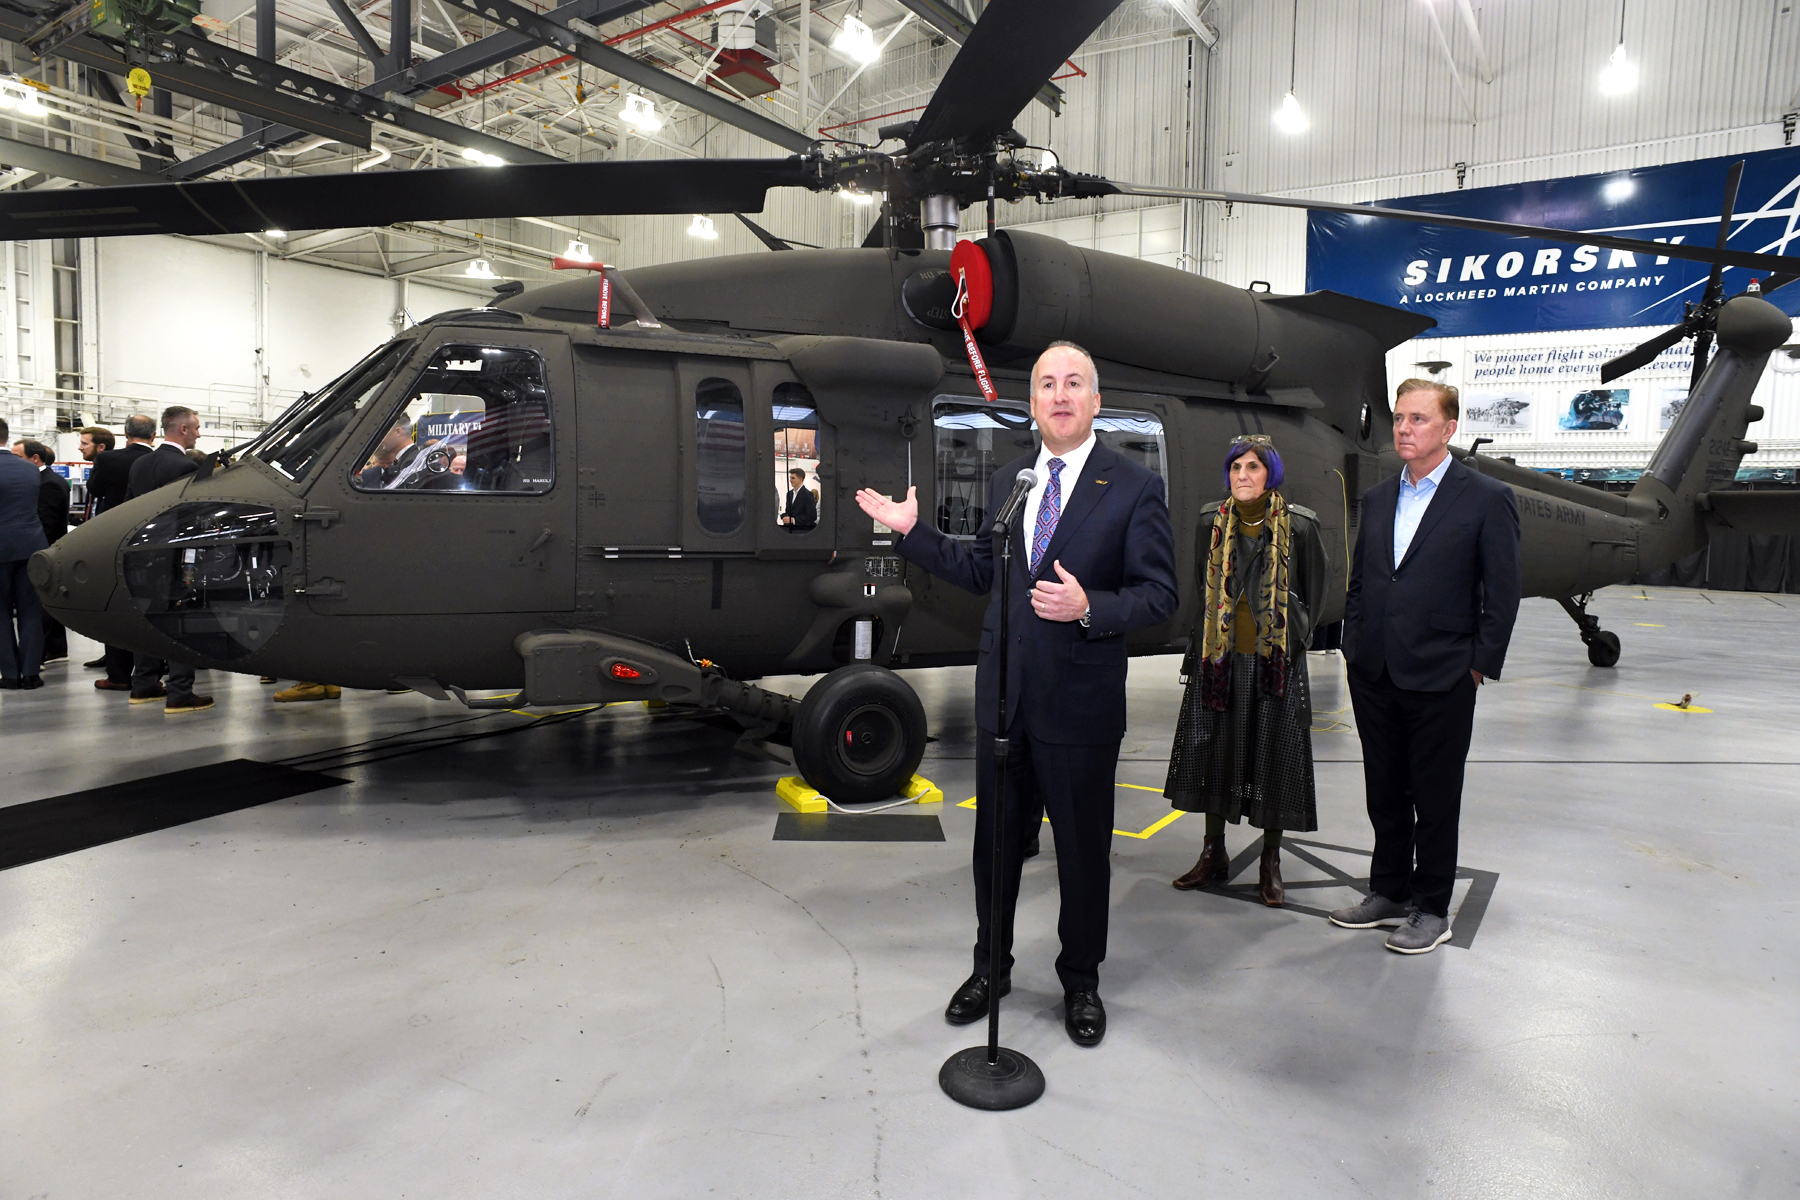 Sikorsky begins layoffs in Connecticut & Maryland in advance of